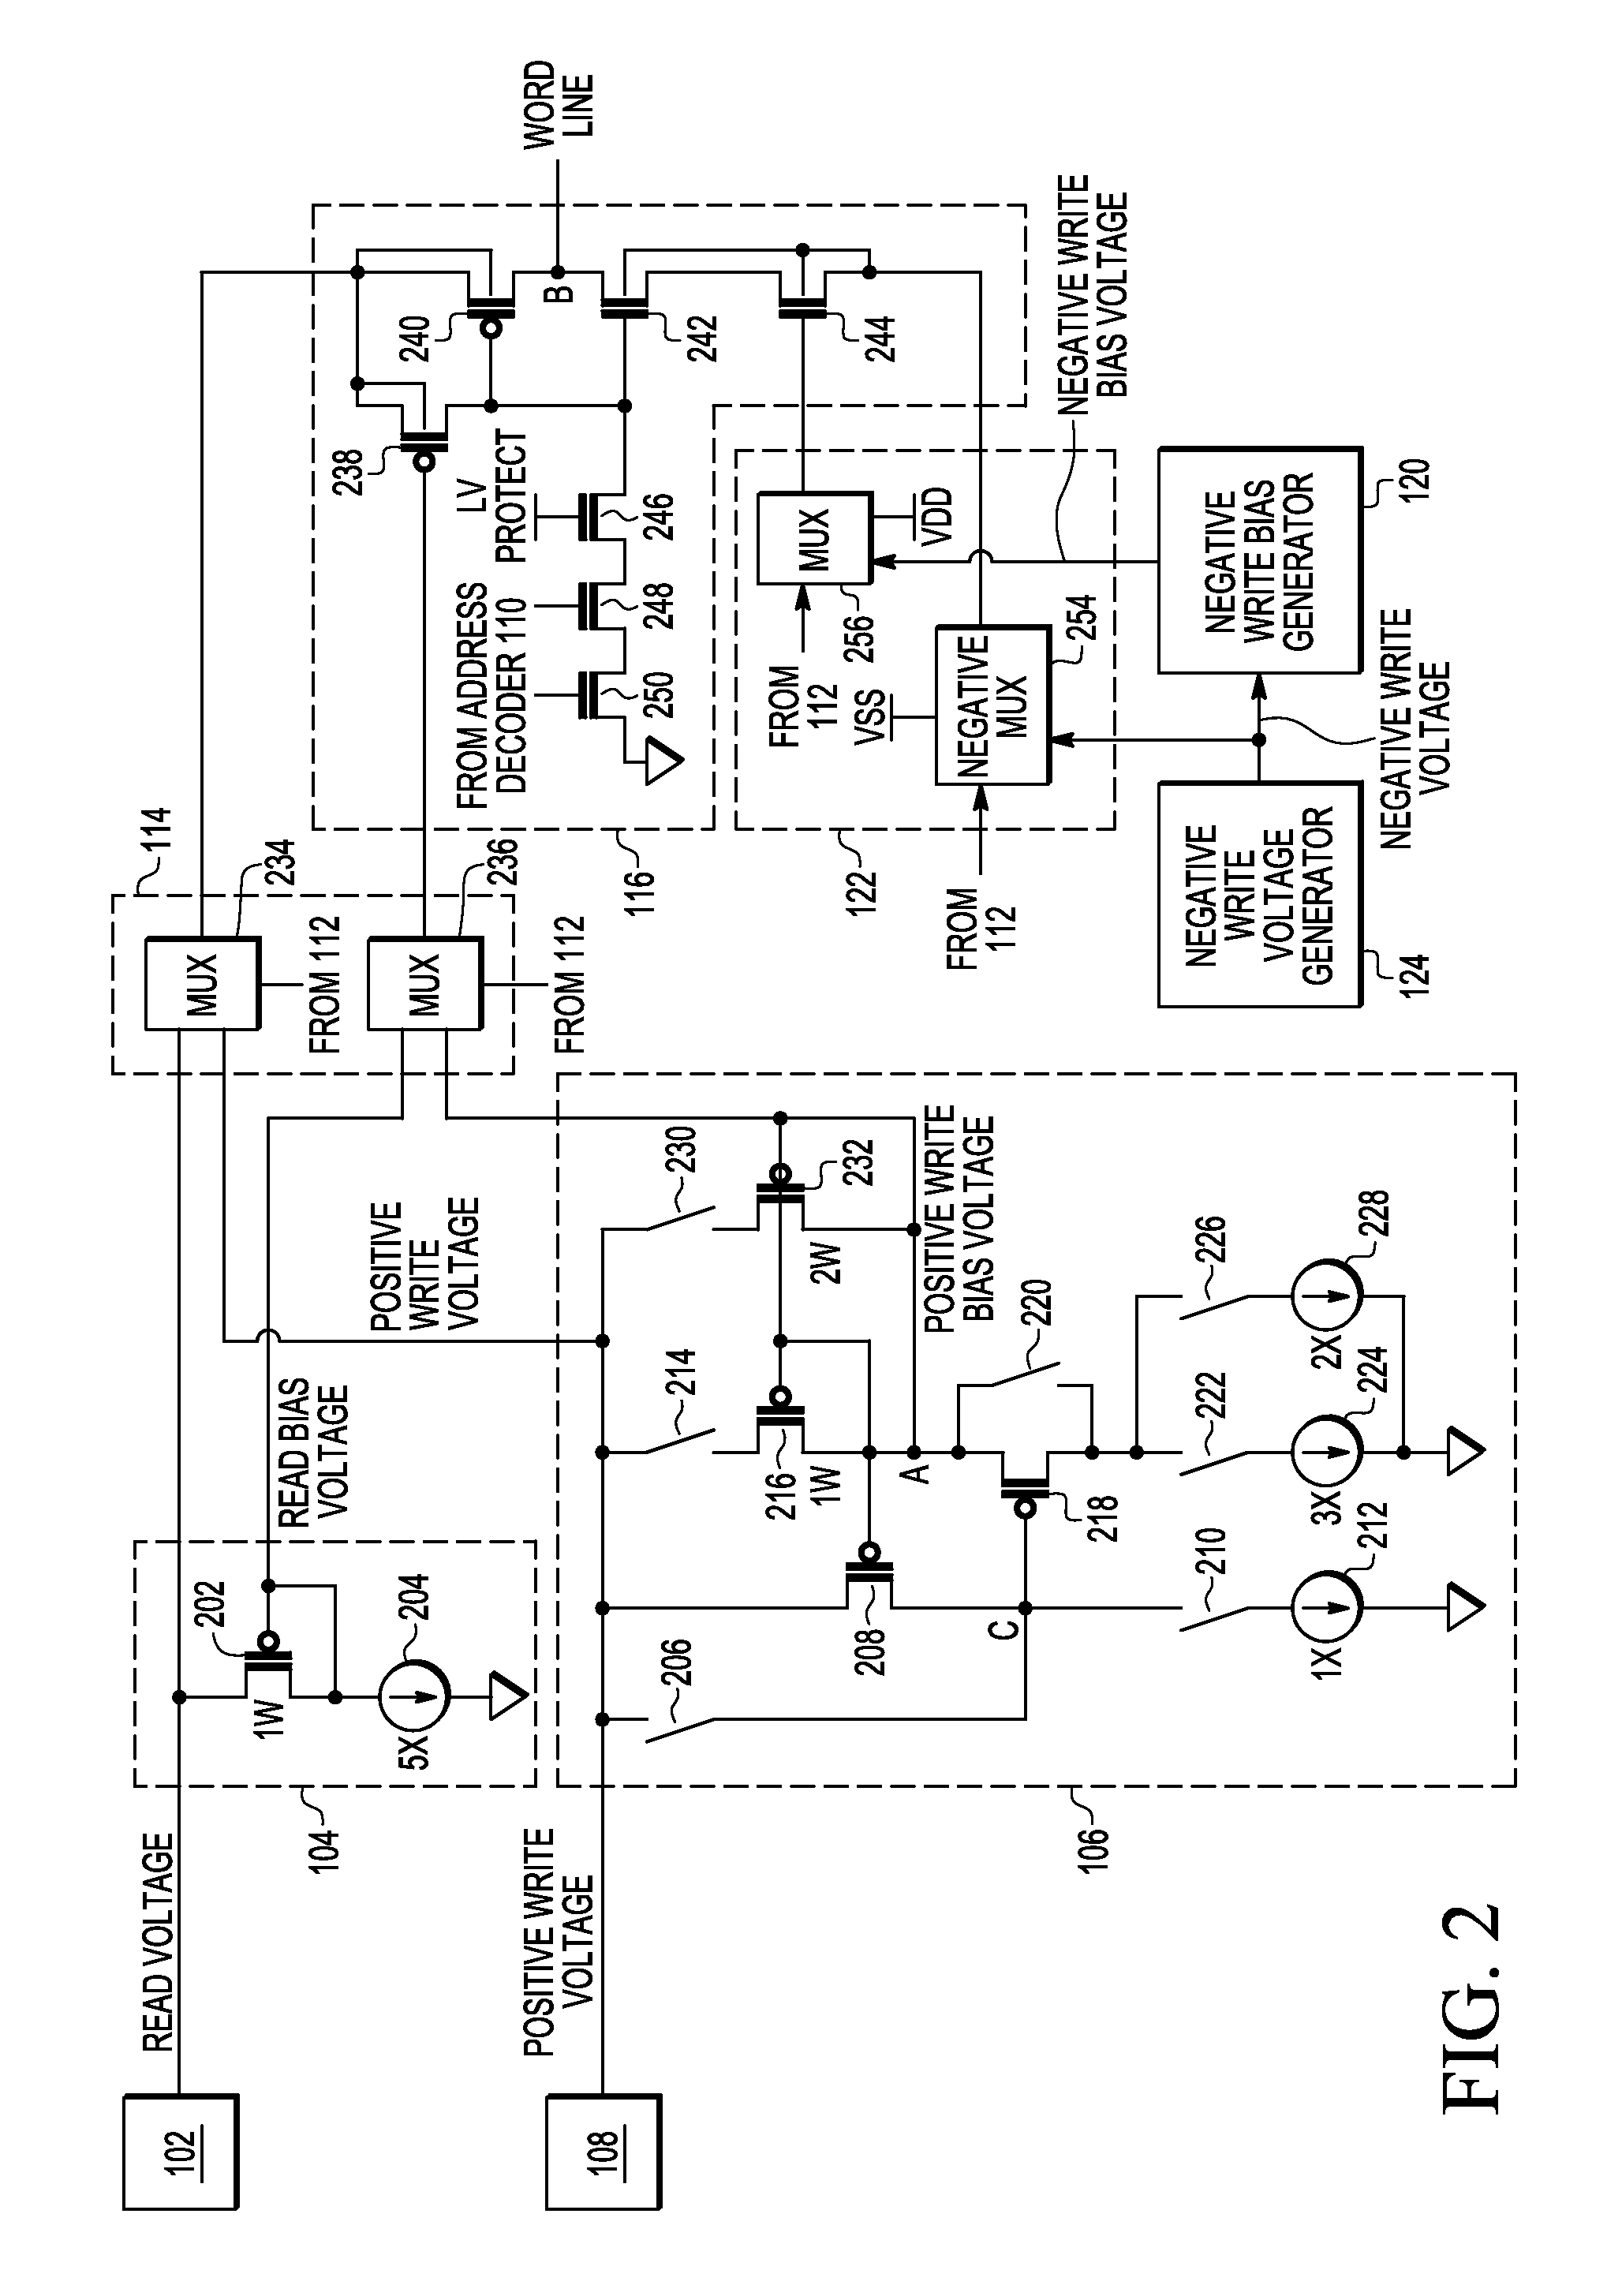 Flash memory with bias voltage for word line/row driver